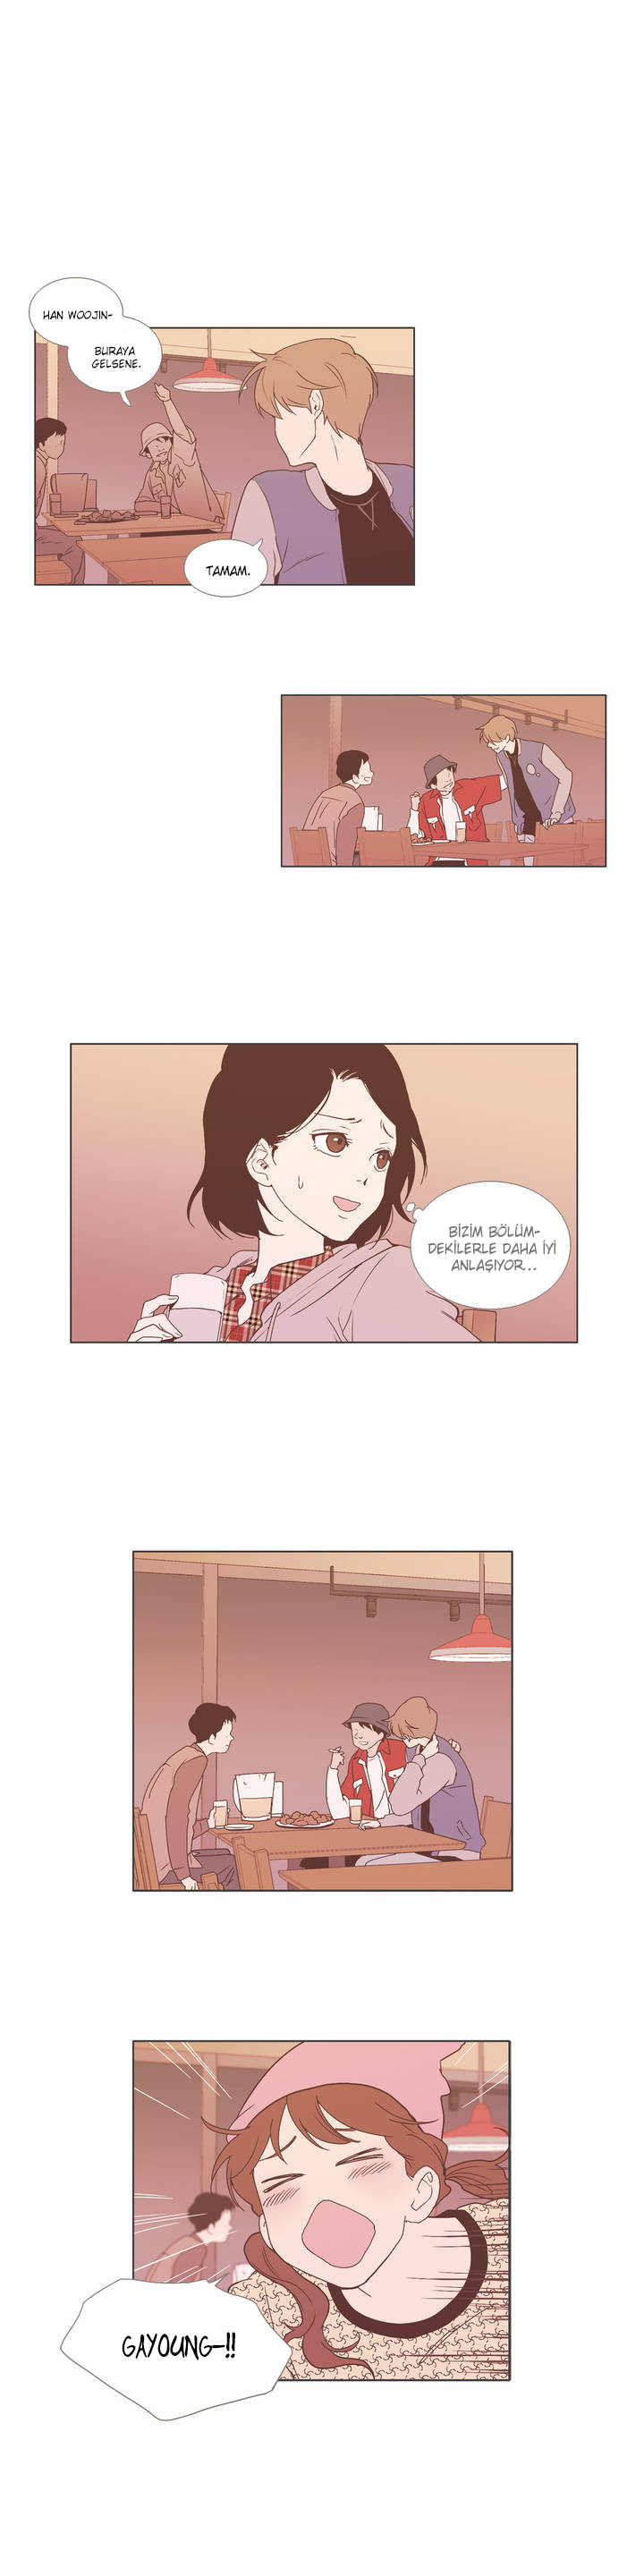 Something About Us: Chapter 06 - Page 3